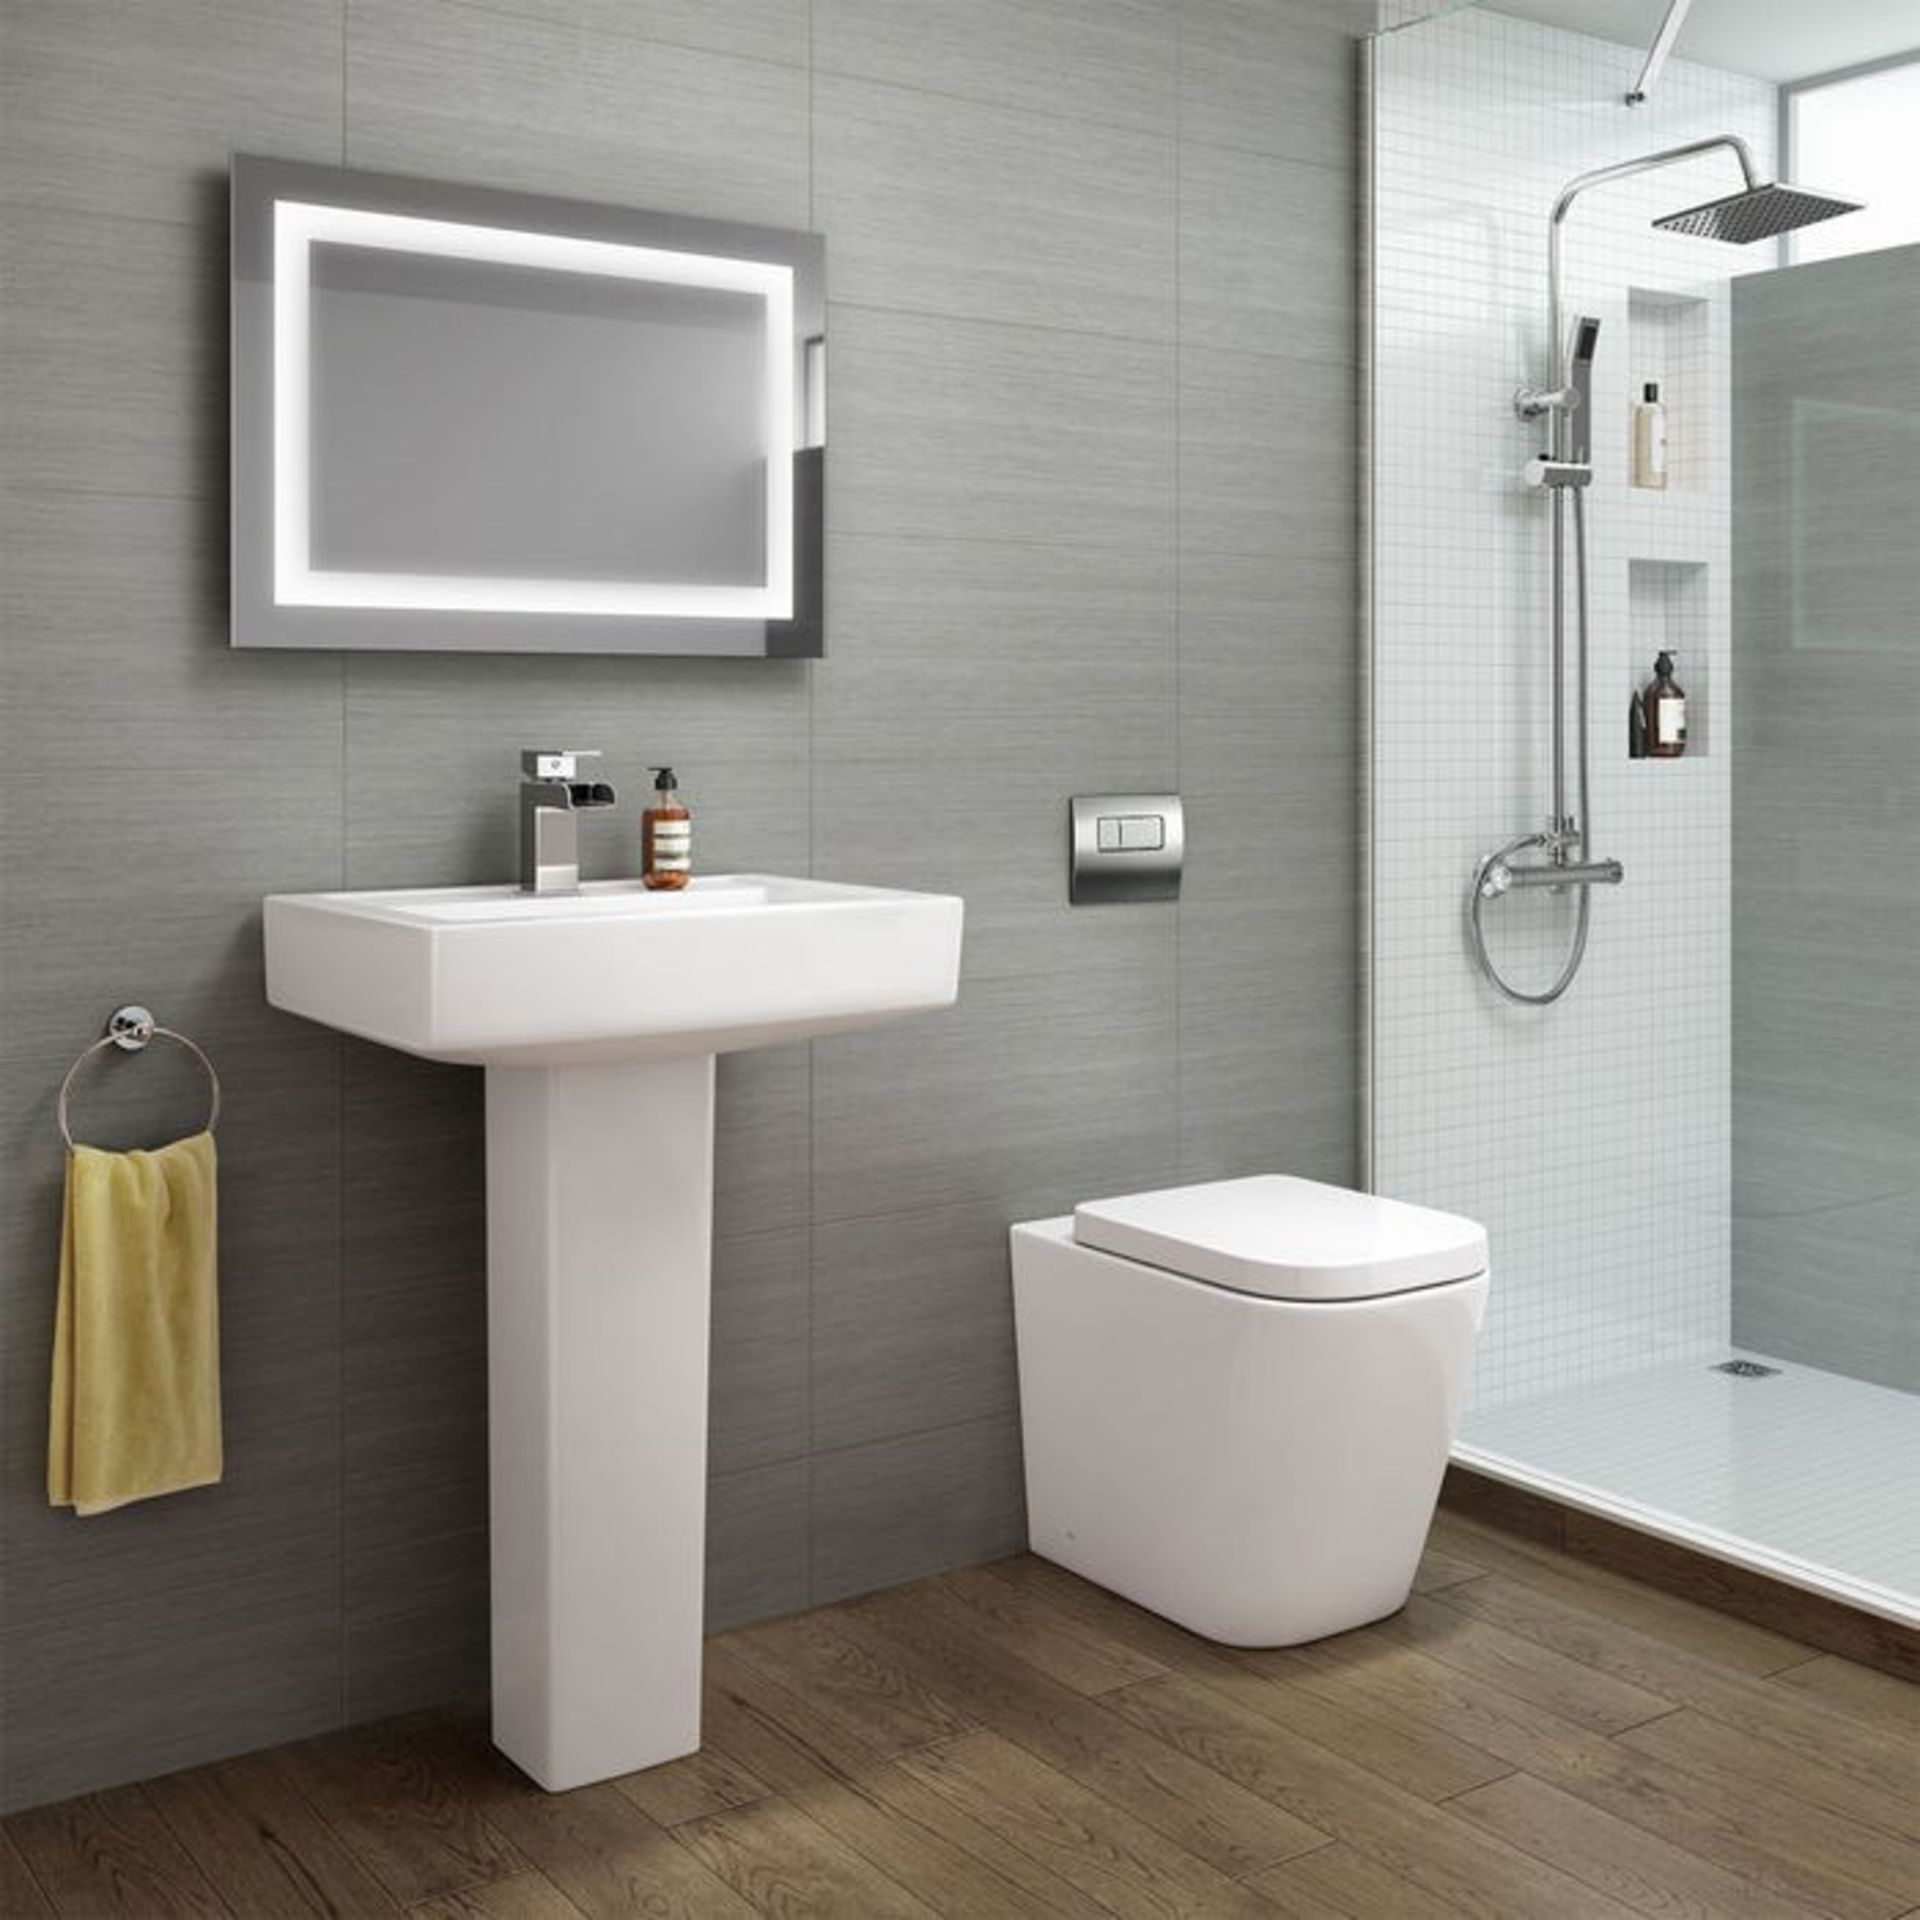 Florence Rimless Back to Wall Toilet inc Luxury Soft Close Seat Rimless design makes it easy to... - Image 2 of 2